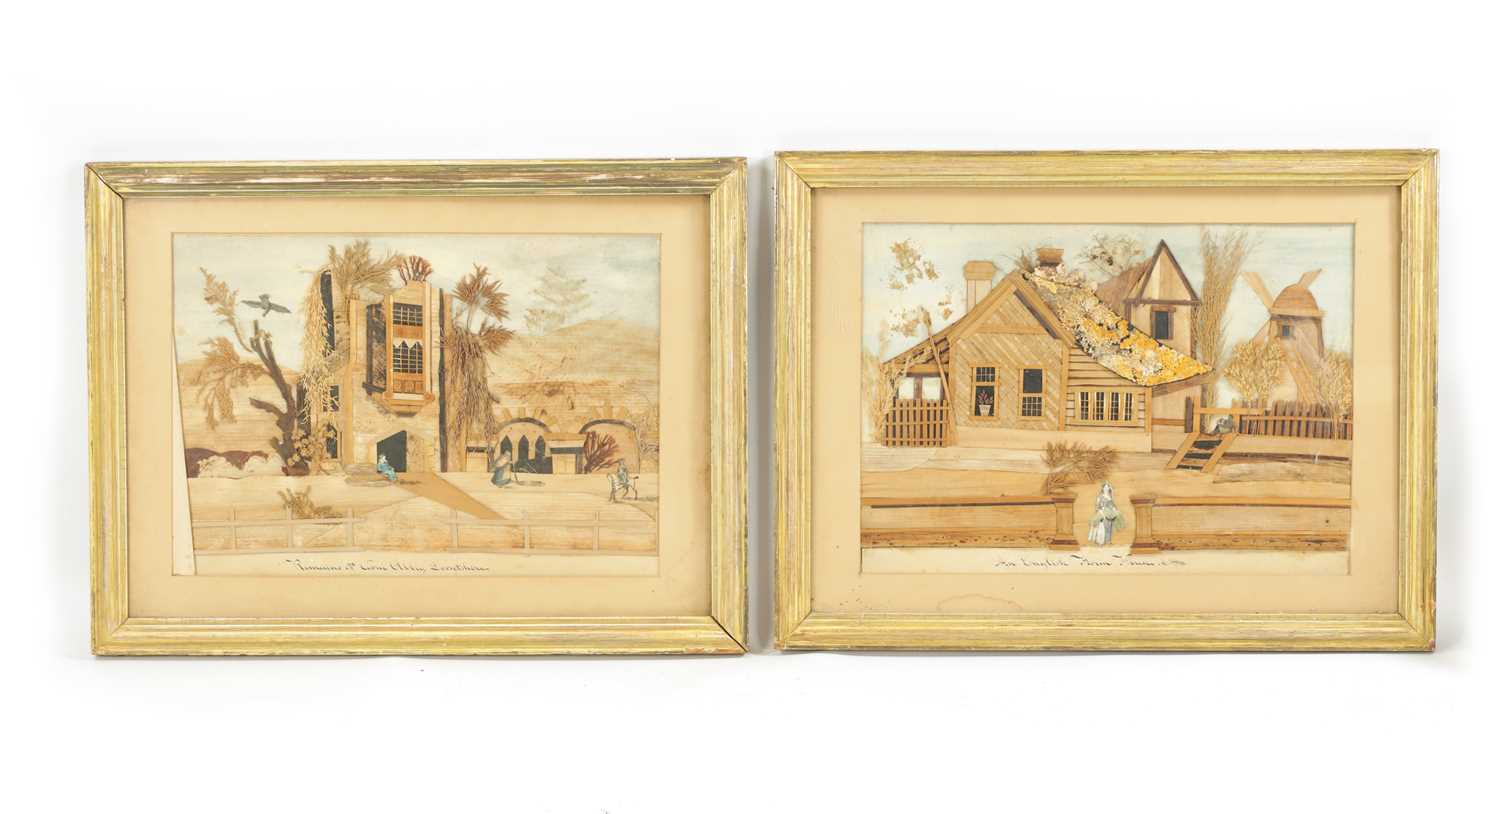 AN UNUSUAL PAIR OF 19TH CENTURY FOLK ART COLLAGES INSCRIBED ‘REMAINS OF CARNE ABBEY, DORSET’ AND ‘AN